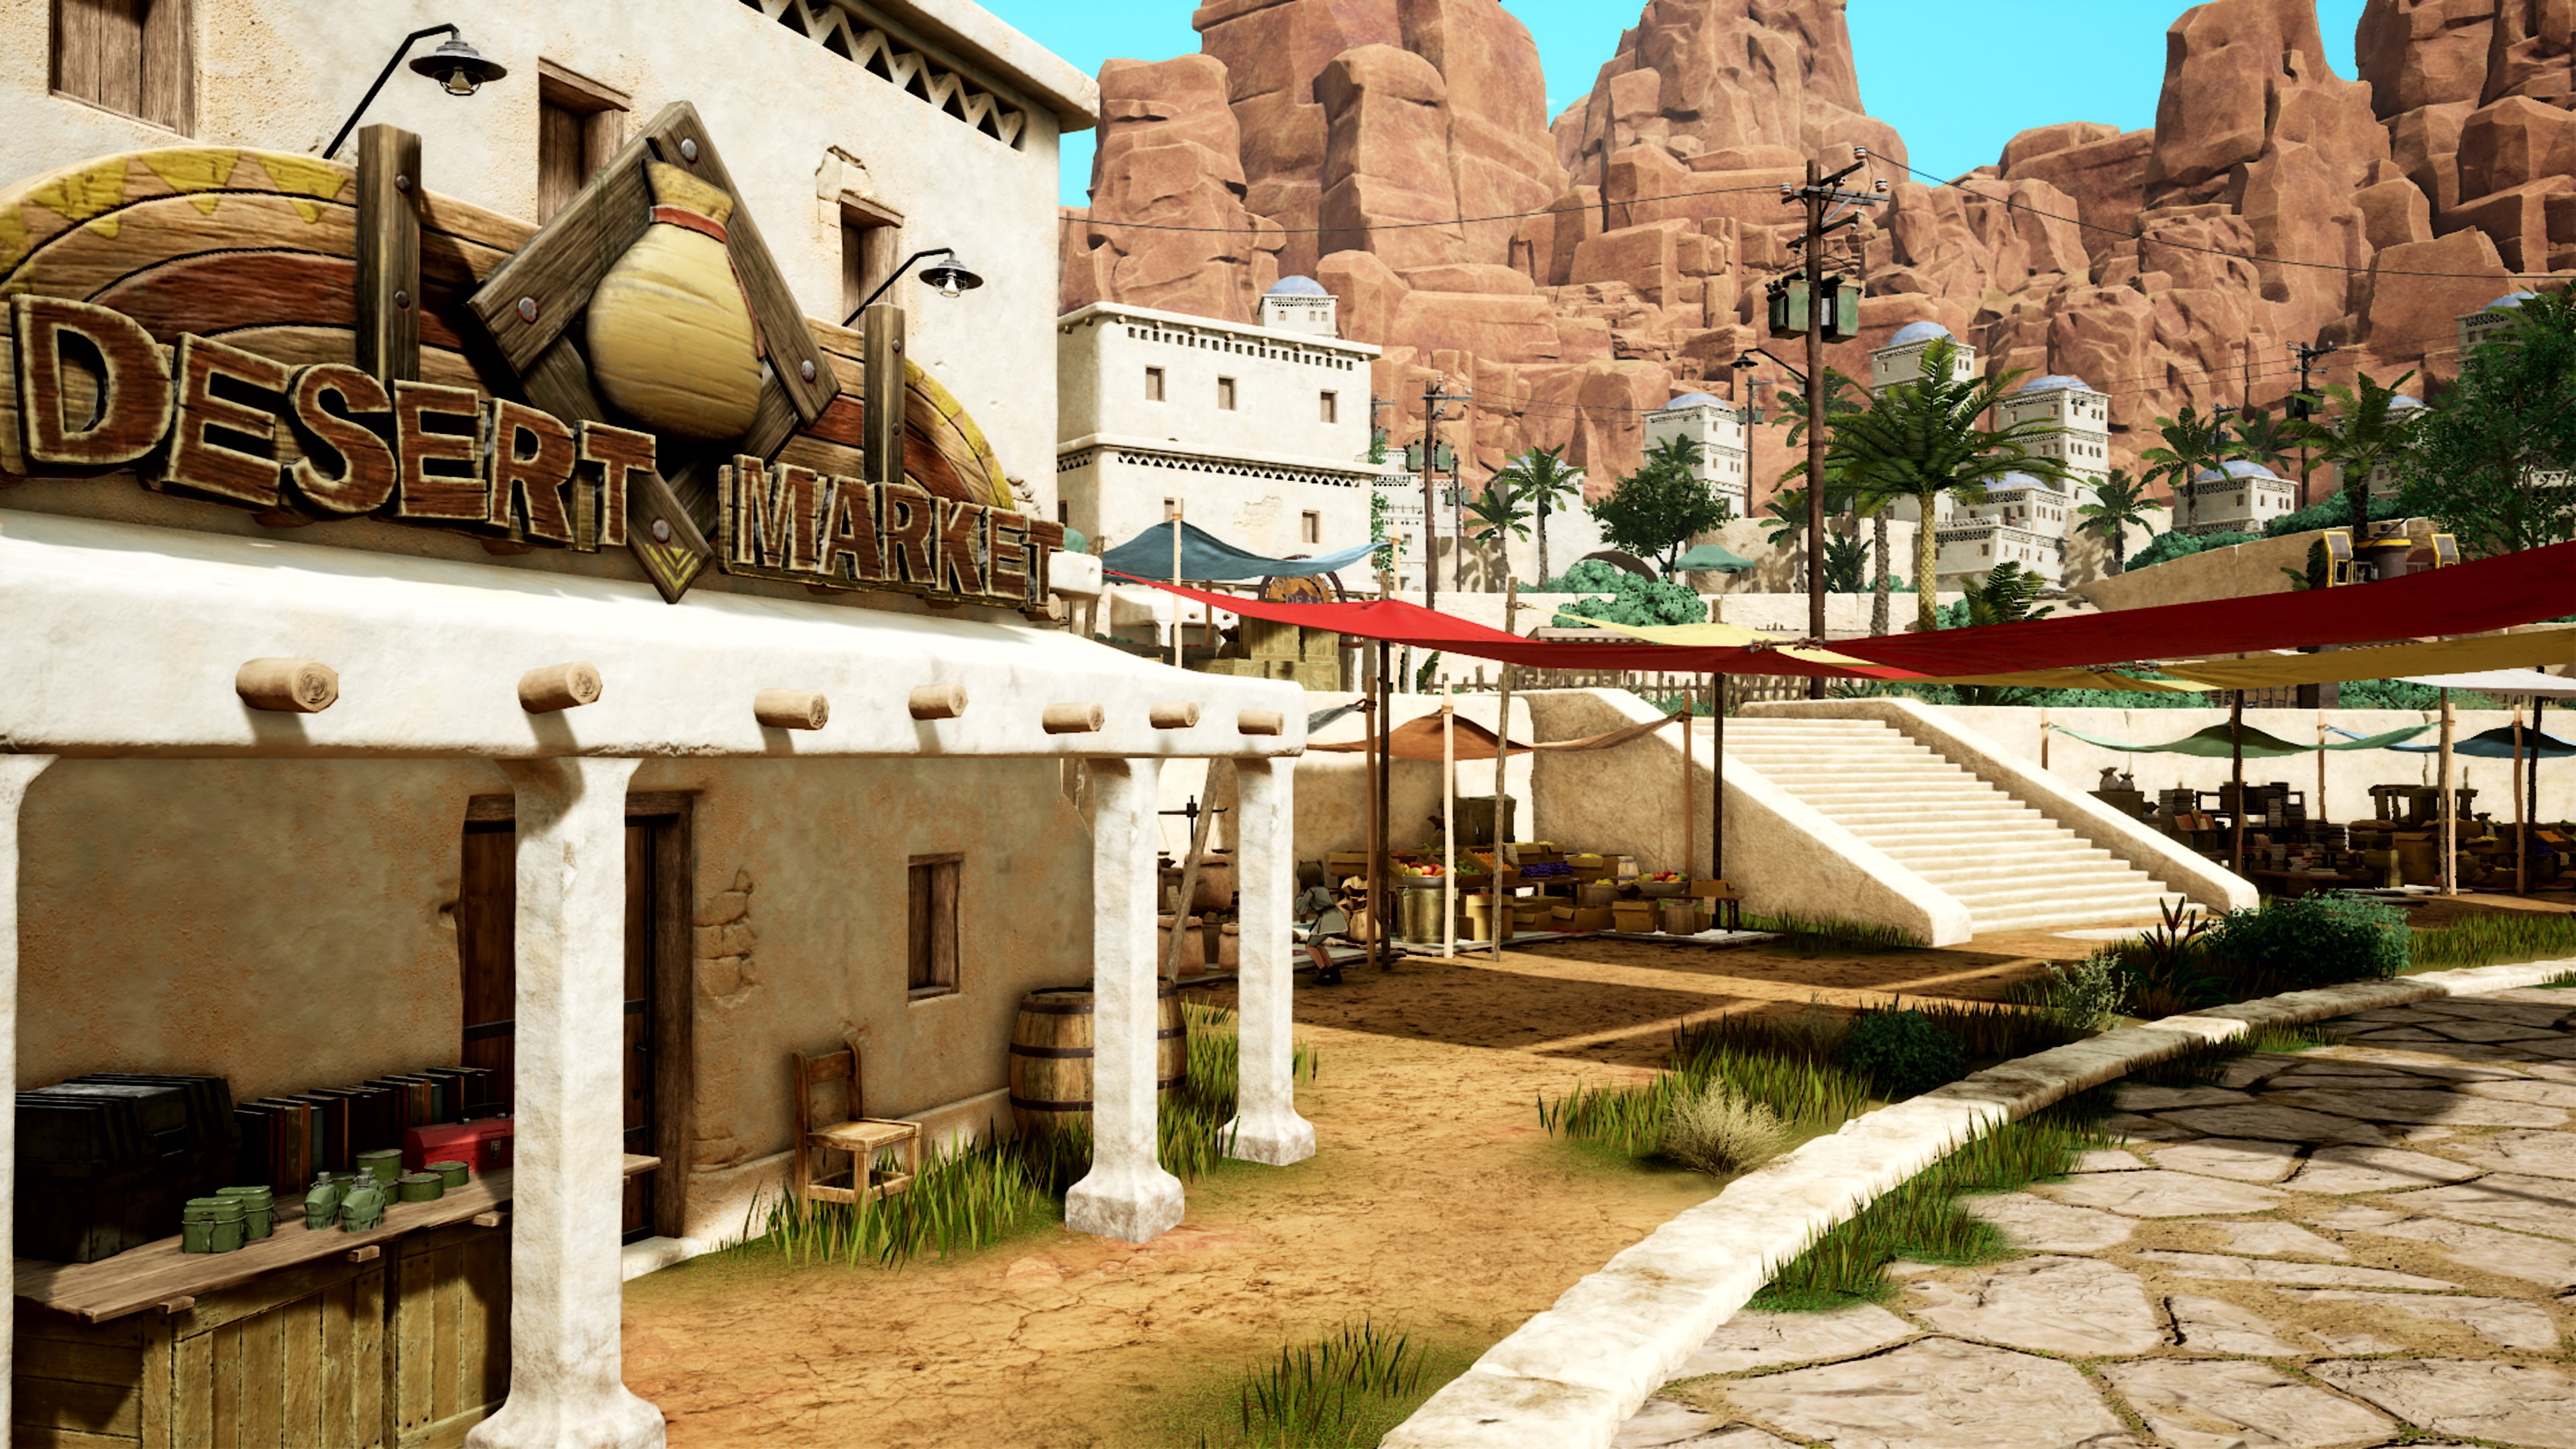 SAND LAND PS4 & PS5